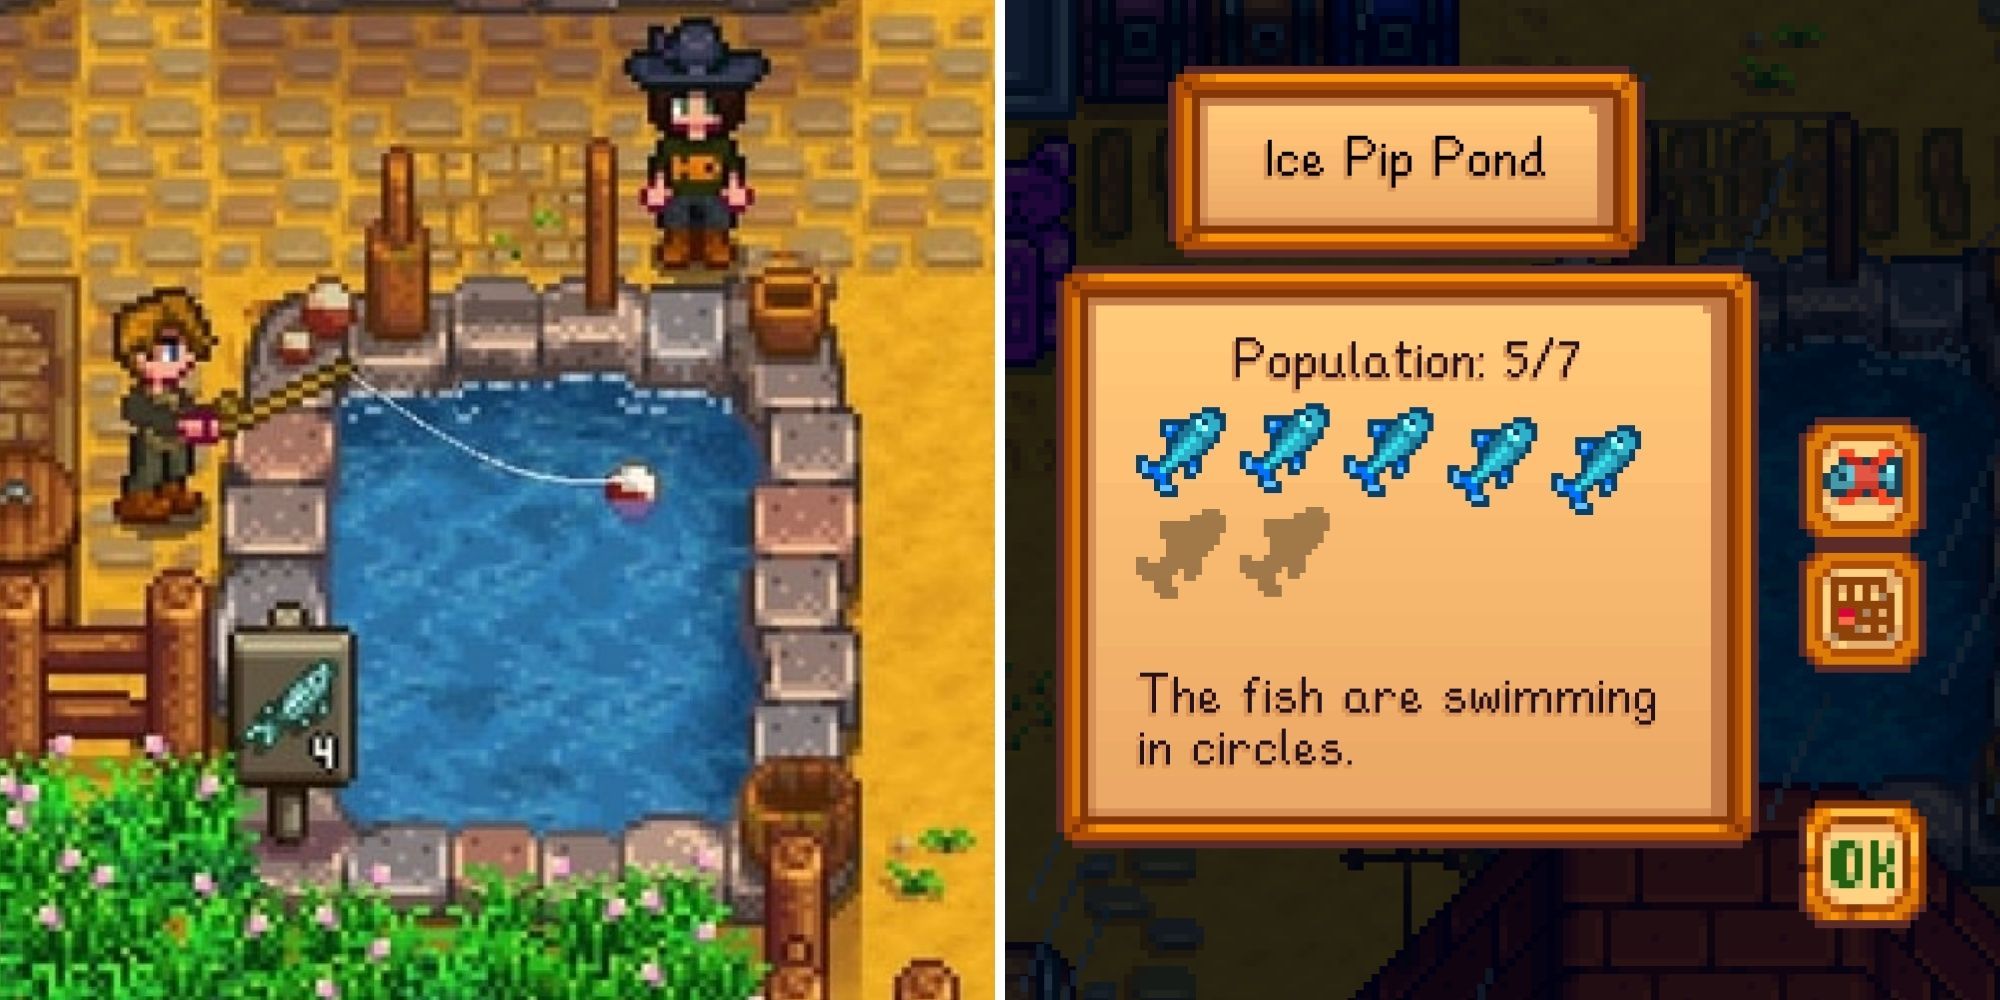 Stardew Valley: A split image of the player fishing in a Fish Pond on left and a pond menu on right